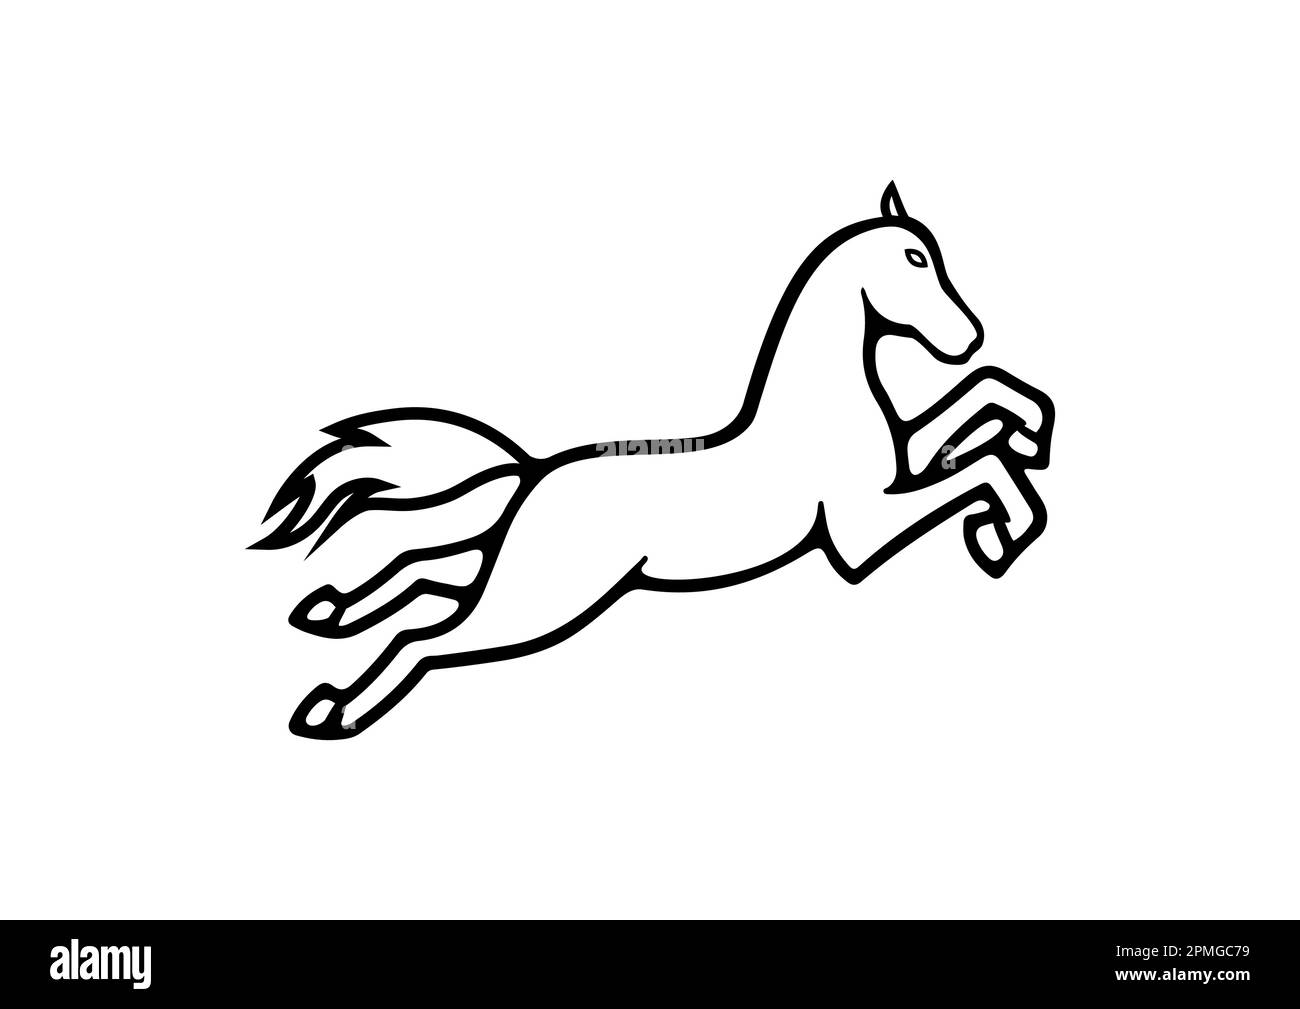 Black and White Horse Silhouette Vector on White Background Stock Vector